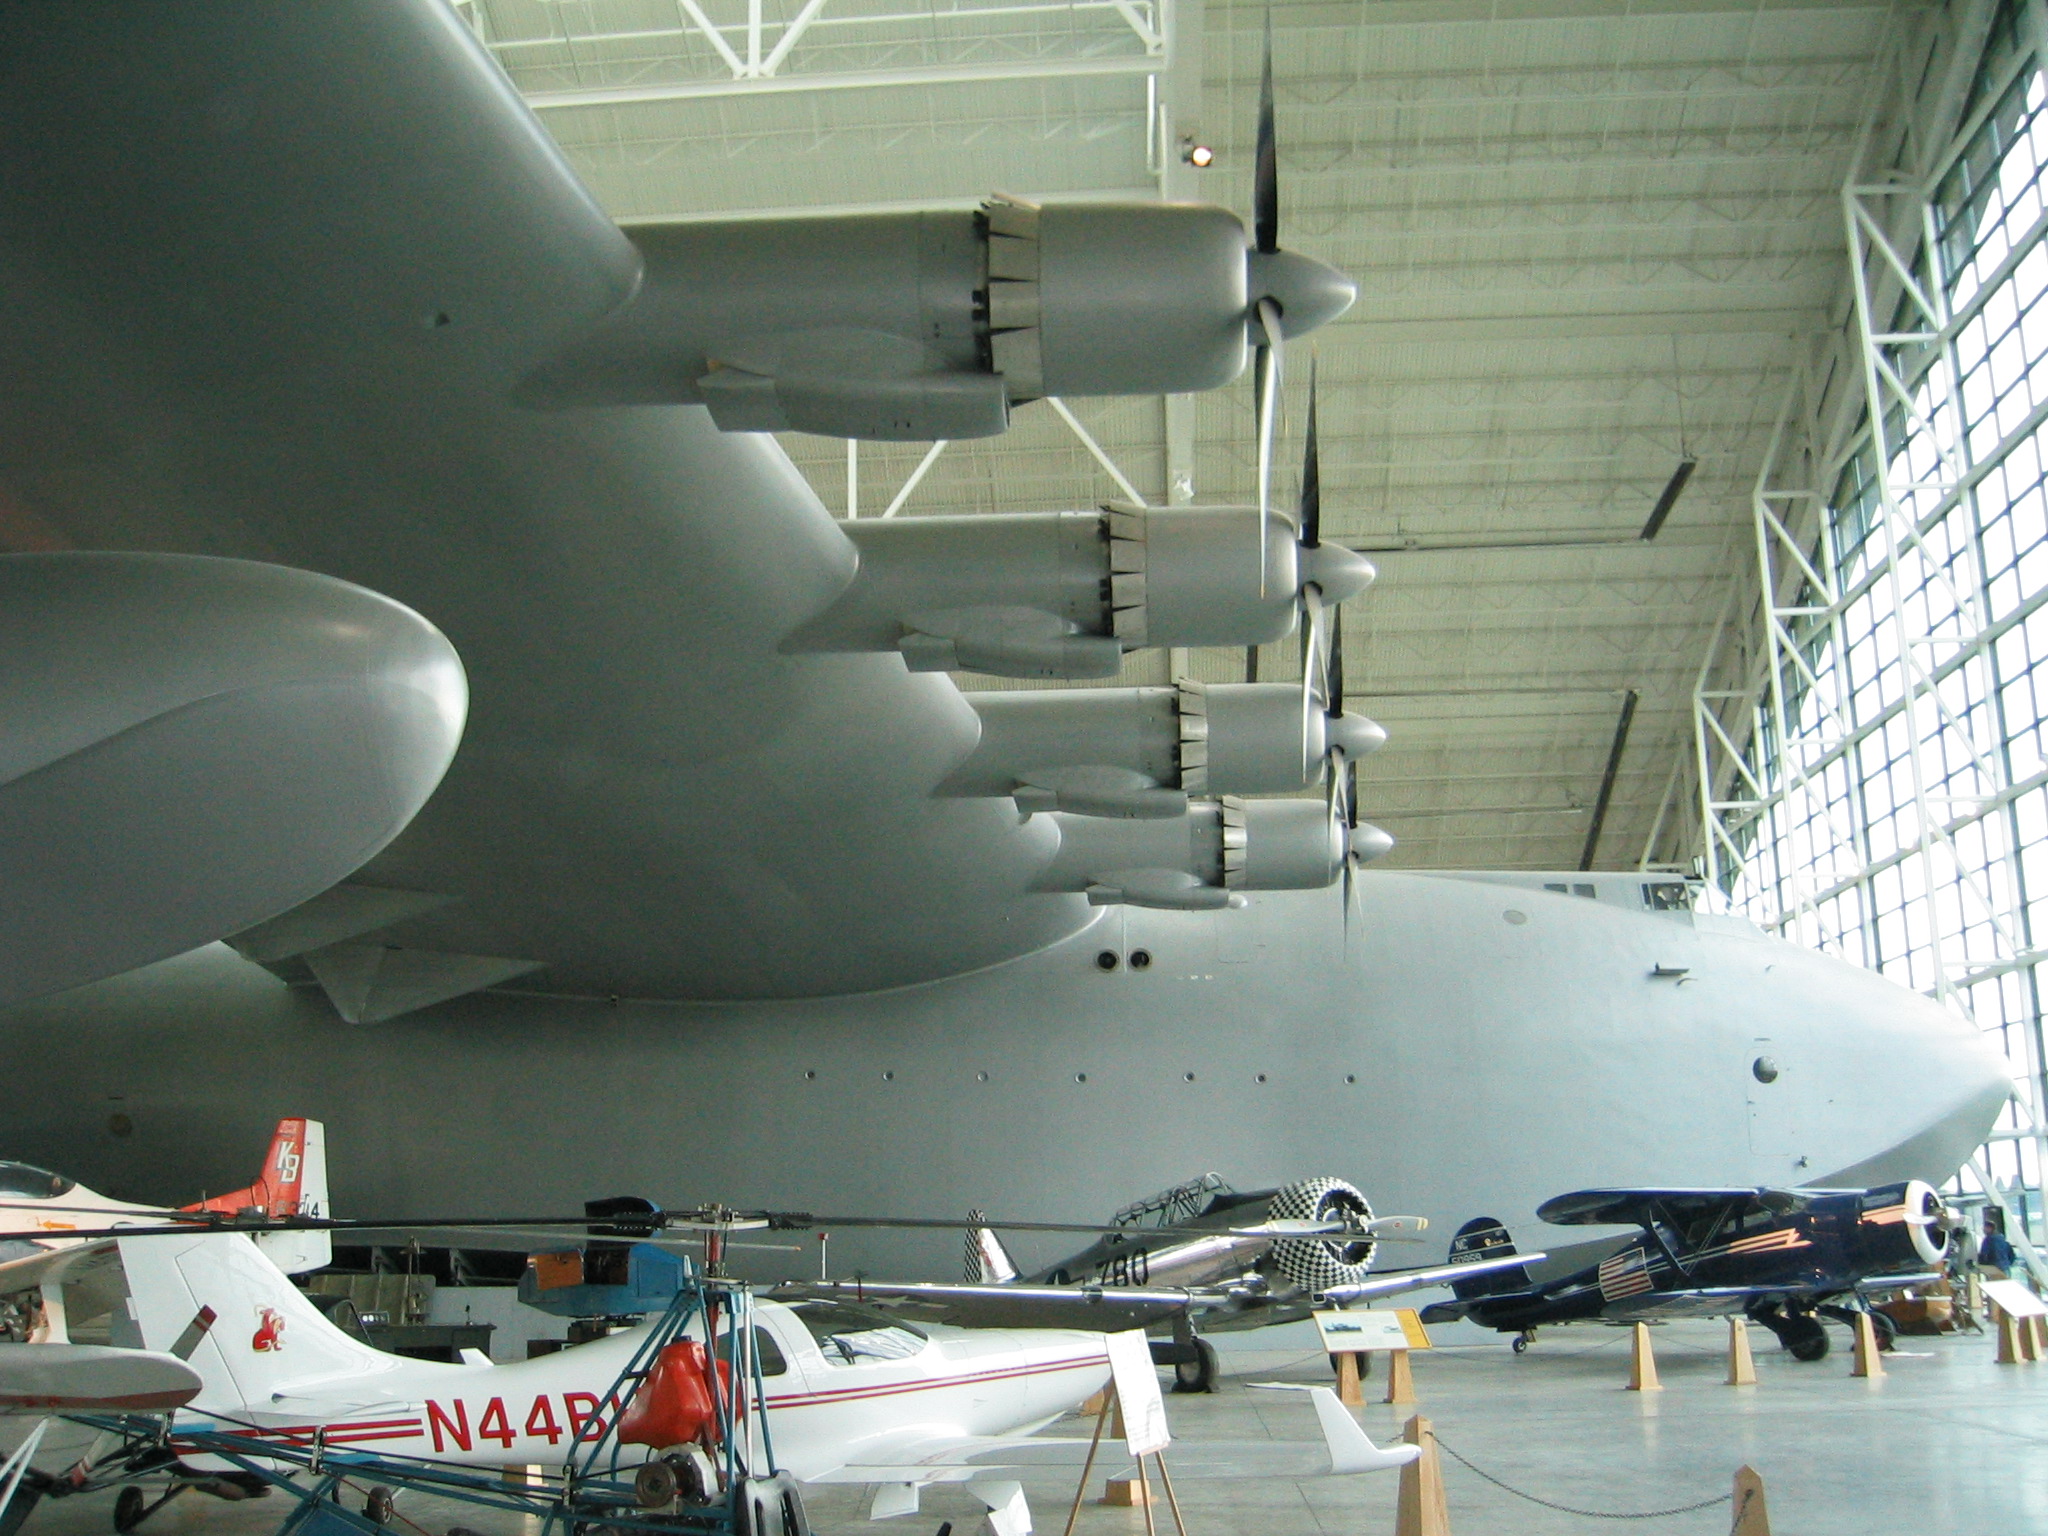 Spruce_Goose_righthand_wing_with_enjins.